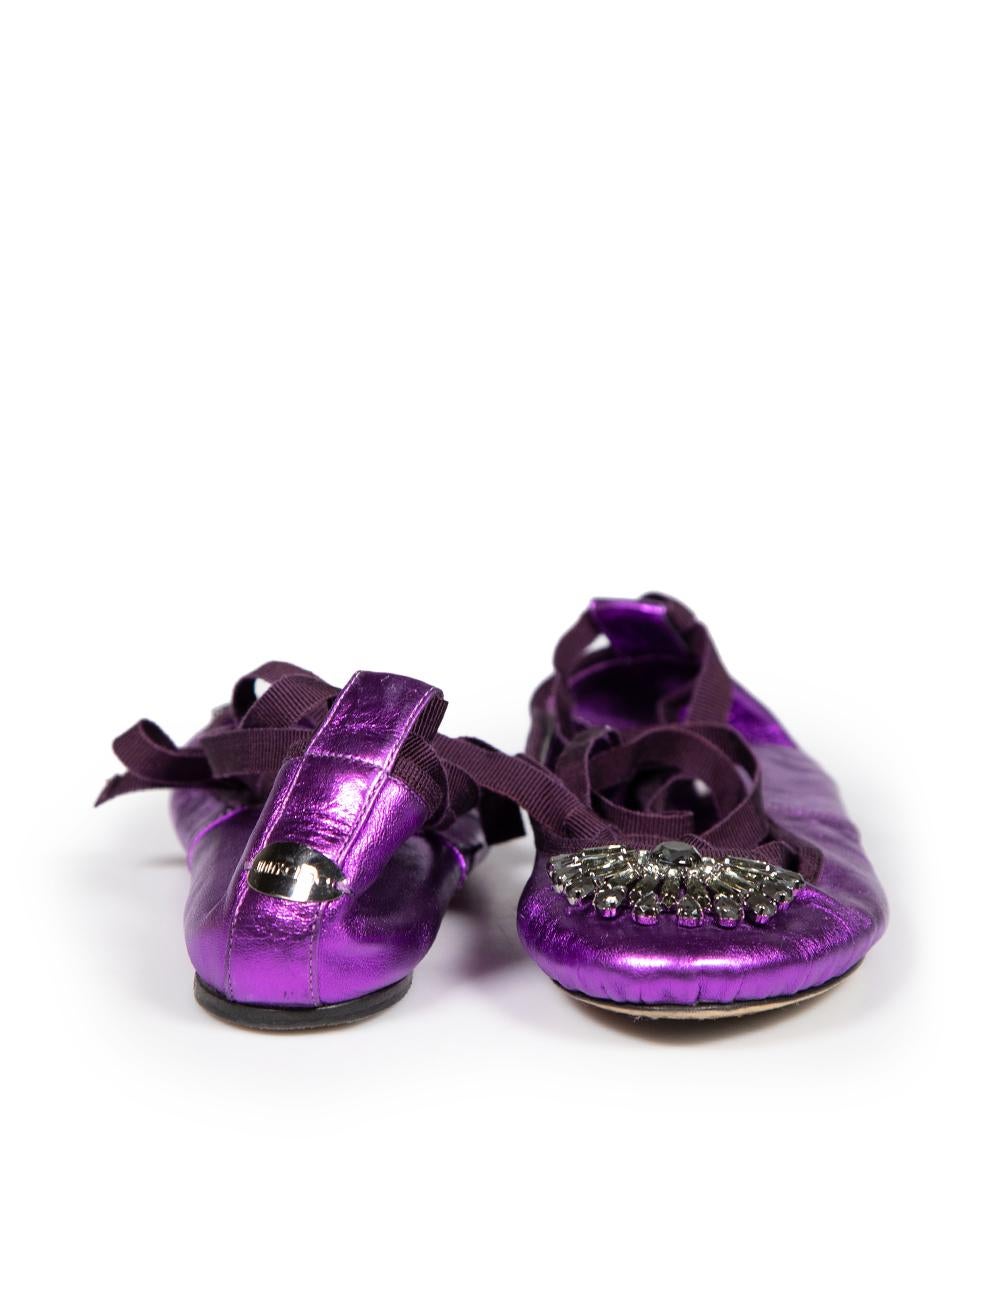 Jimmy Choo Purple Crystal Grace Ballet Flats Size IT 38.5 In Good Condition For Sale In London, GB